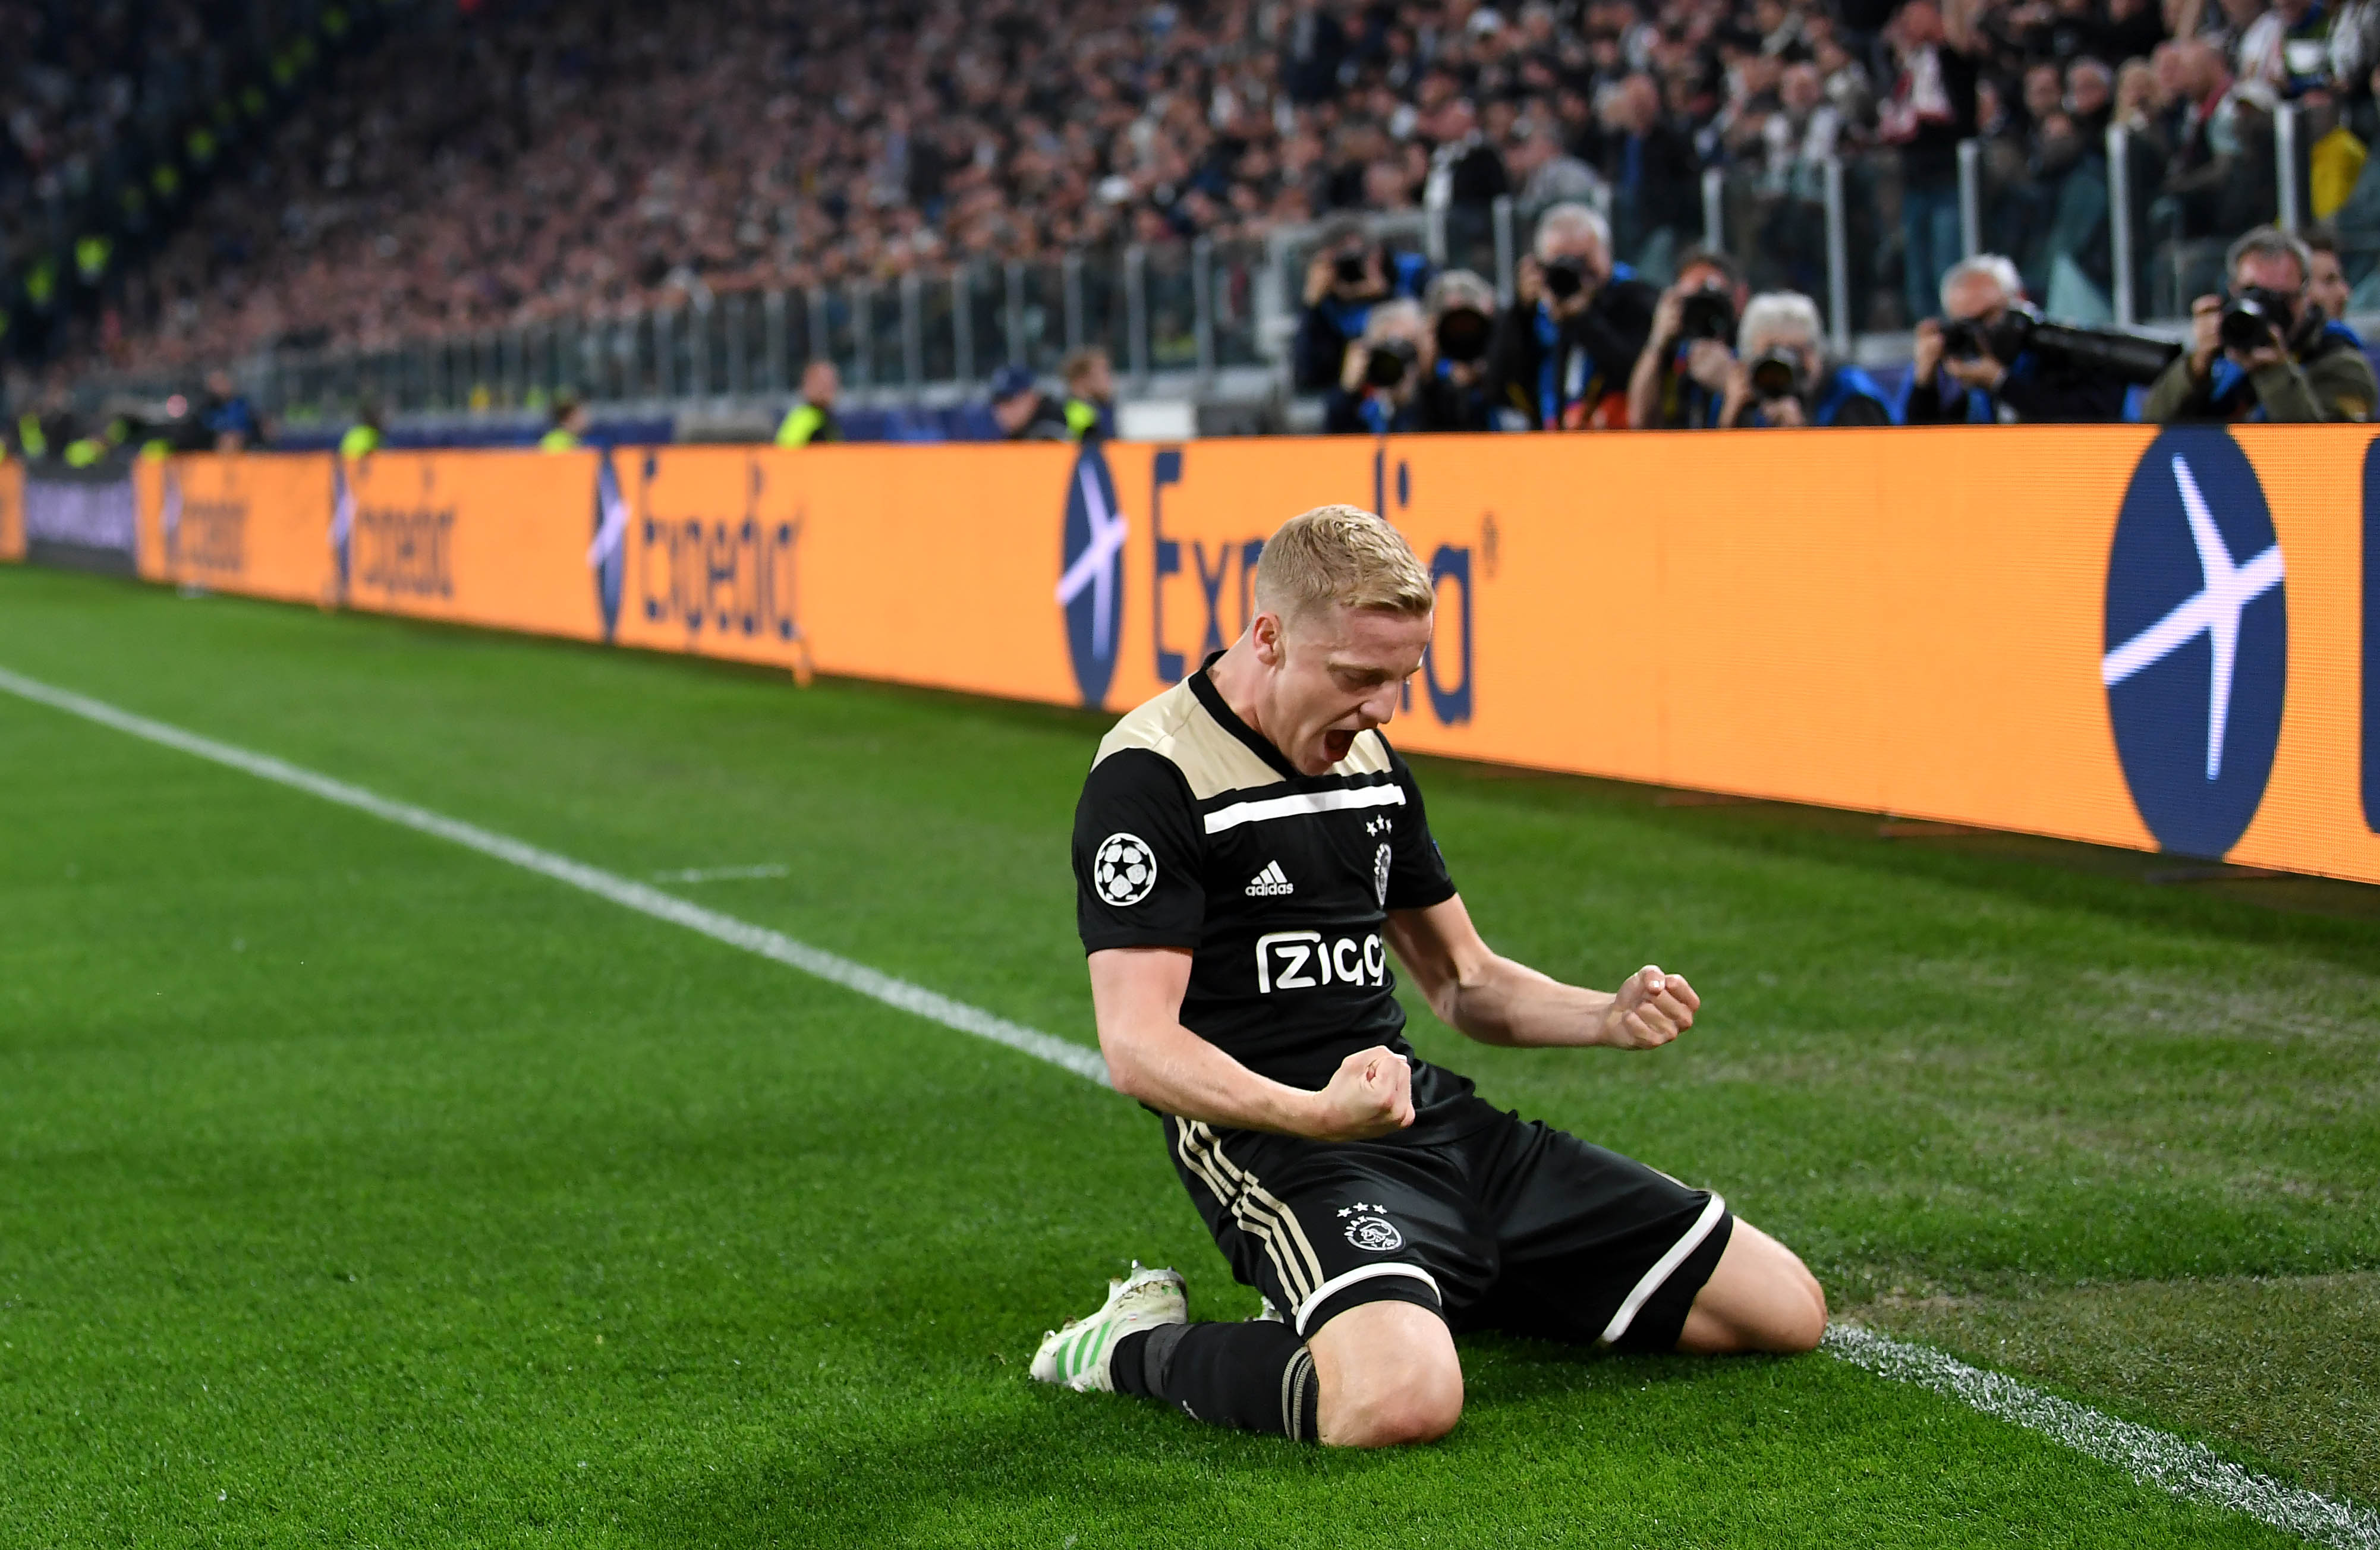 TURIN, ITALY - APRIL 16:  Donny van de Beek of Ajax celebrates after scoring a goal during the UEFA Champions League Quarter Final second leg match between Juventus and Ajax at Allianz Stadium on April 16, 2019 in Turin, Italy. (Photo by Stuart Franklin/Getty Images)